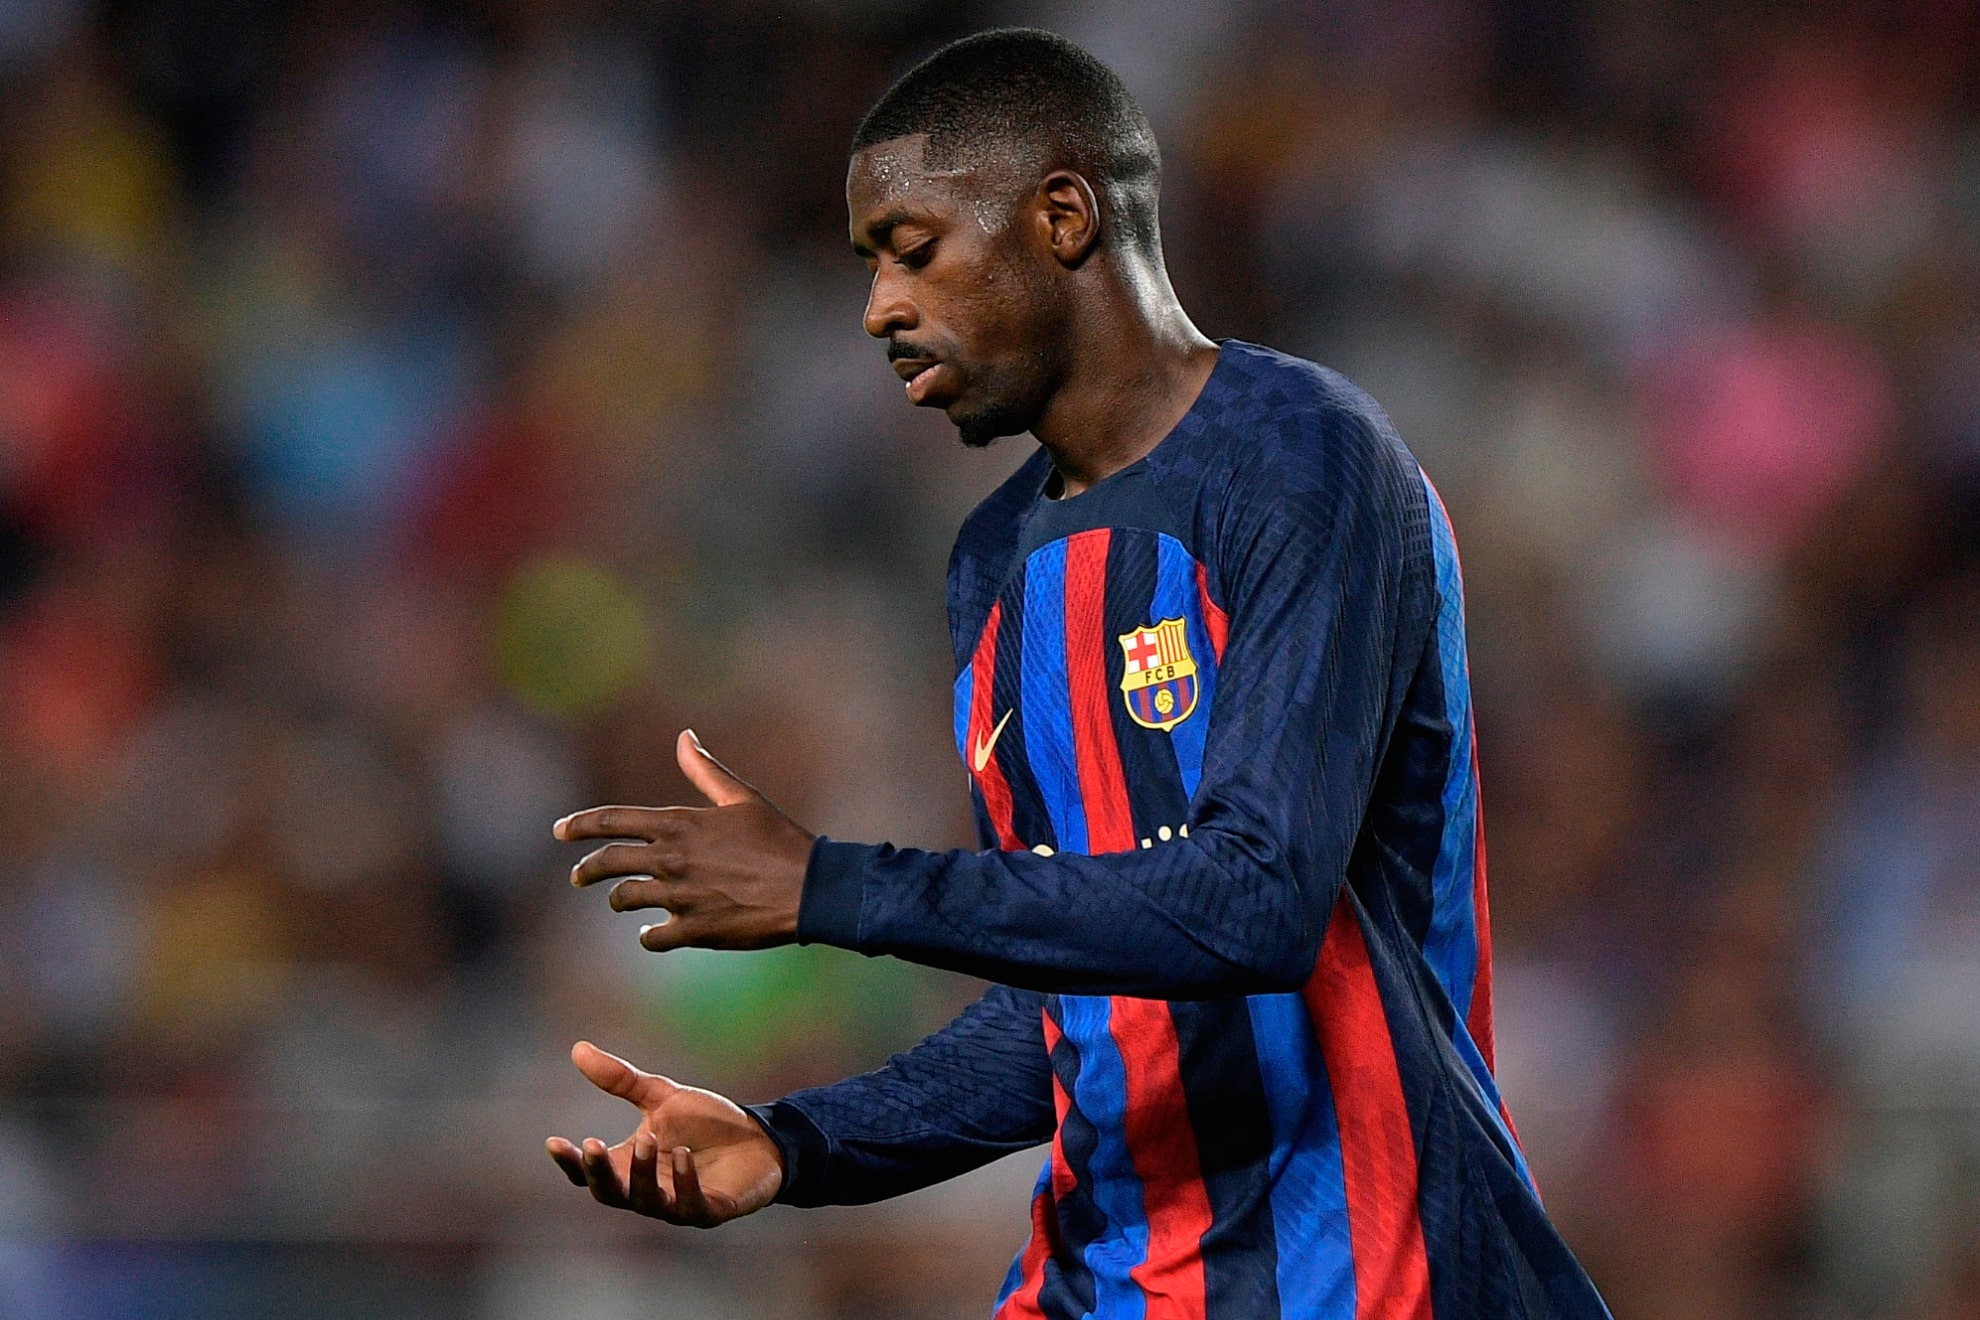 "He Is Leaving Barcelona" - PSG Set To Buy This Barcelona Player For Just €50m